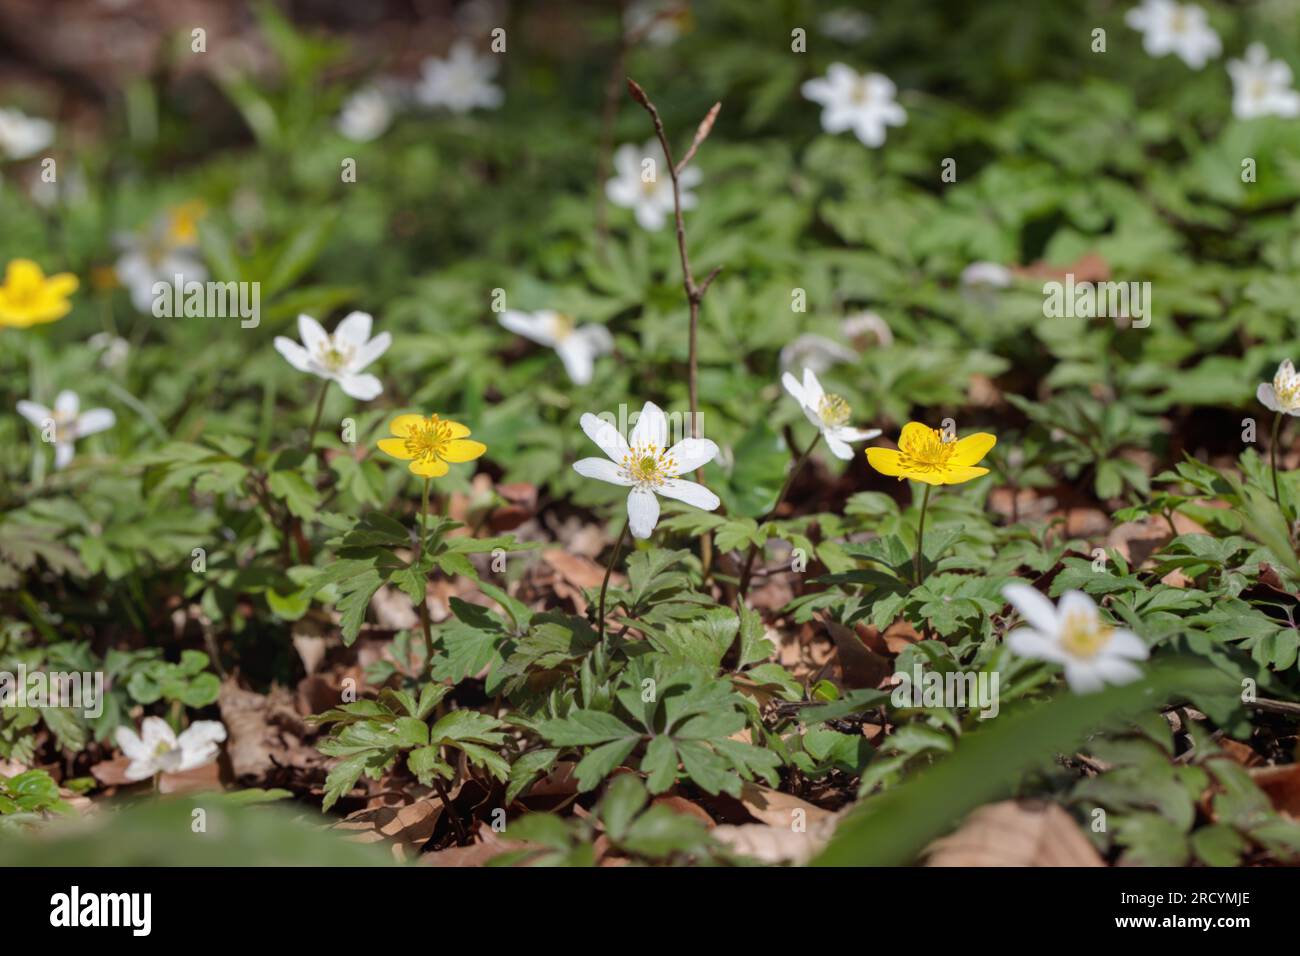 Group of white (Anemone nemorosa) and yellow (Anemone ranunculoides) wood anemones  growing together in a forest. Stock Photo